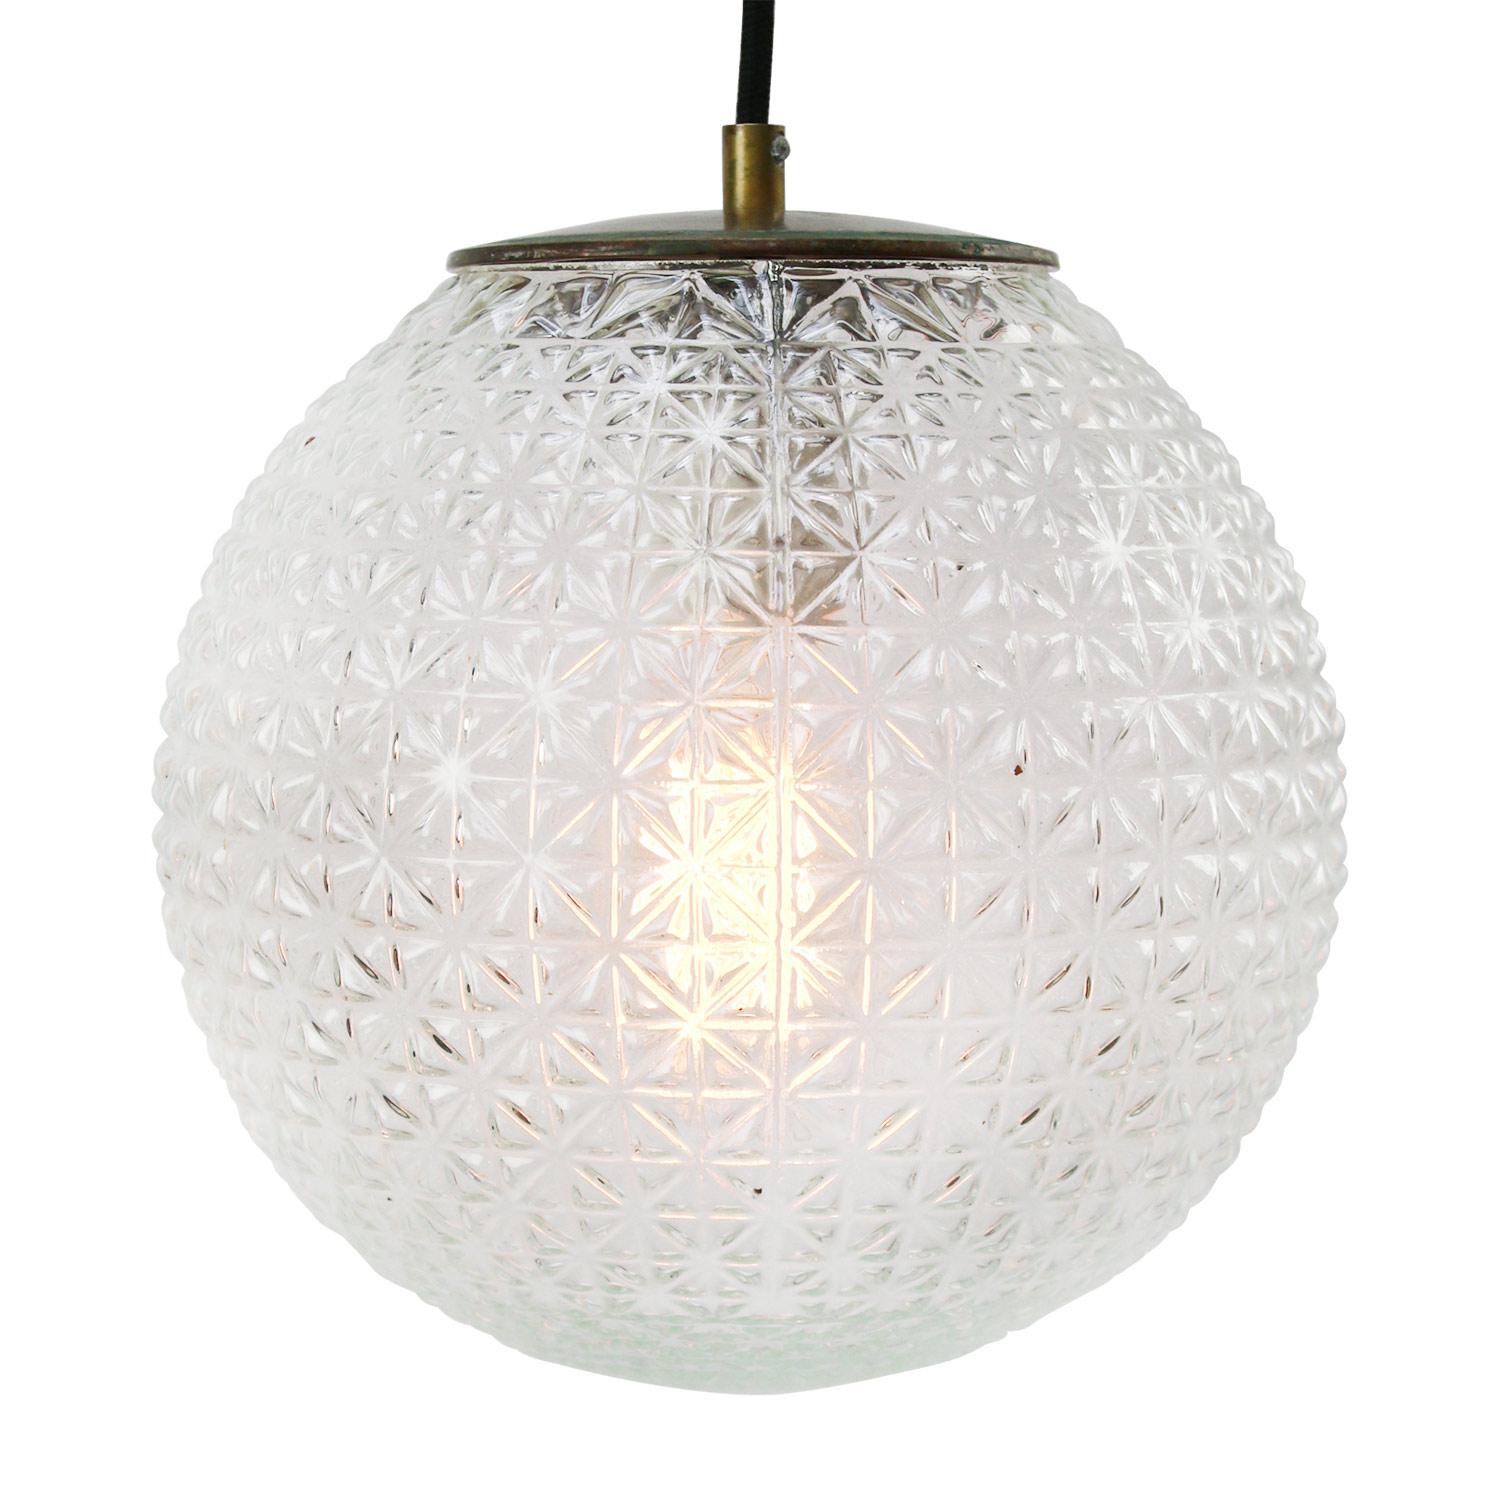 Clear texture glass pendant with brass top
2 meter black wire

Weight: 2.50 kg / 5.5 lb

Priced per individual item. All lamps have been made suitable by international standards for incandescent light bulbs, energy-efficient and LED bulbs.